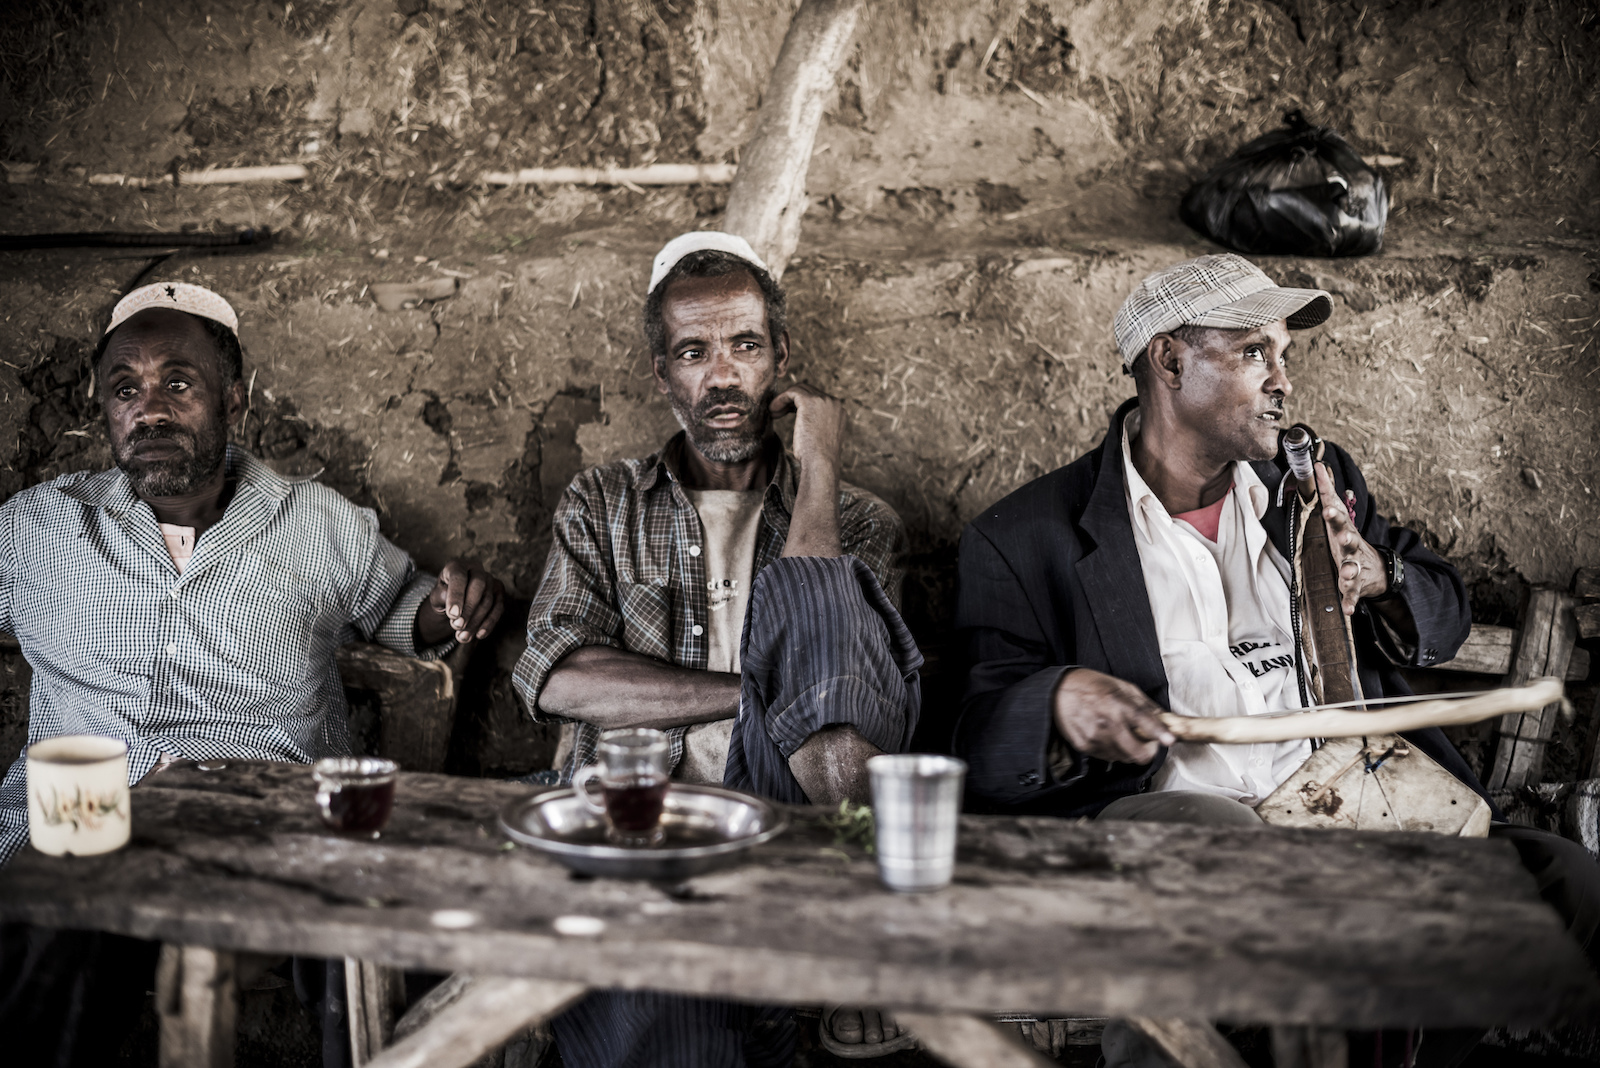 Images by Dan Milner from Giro s trip to Ethiopia.